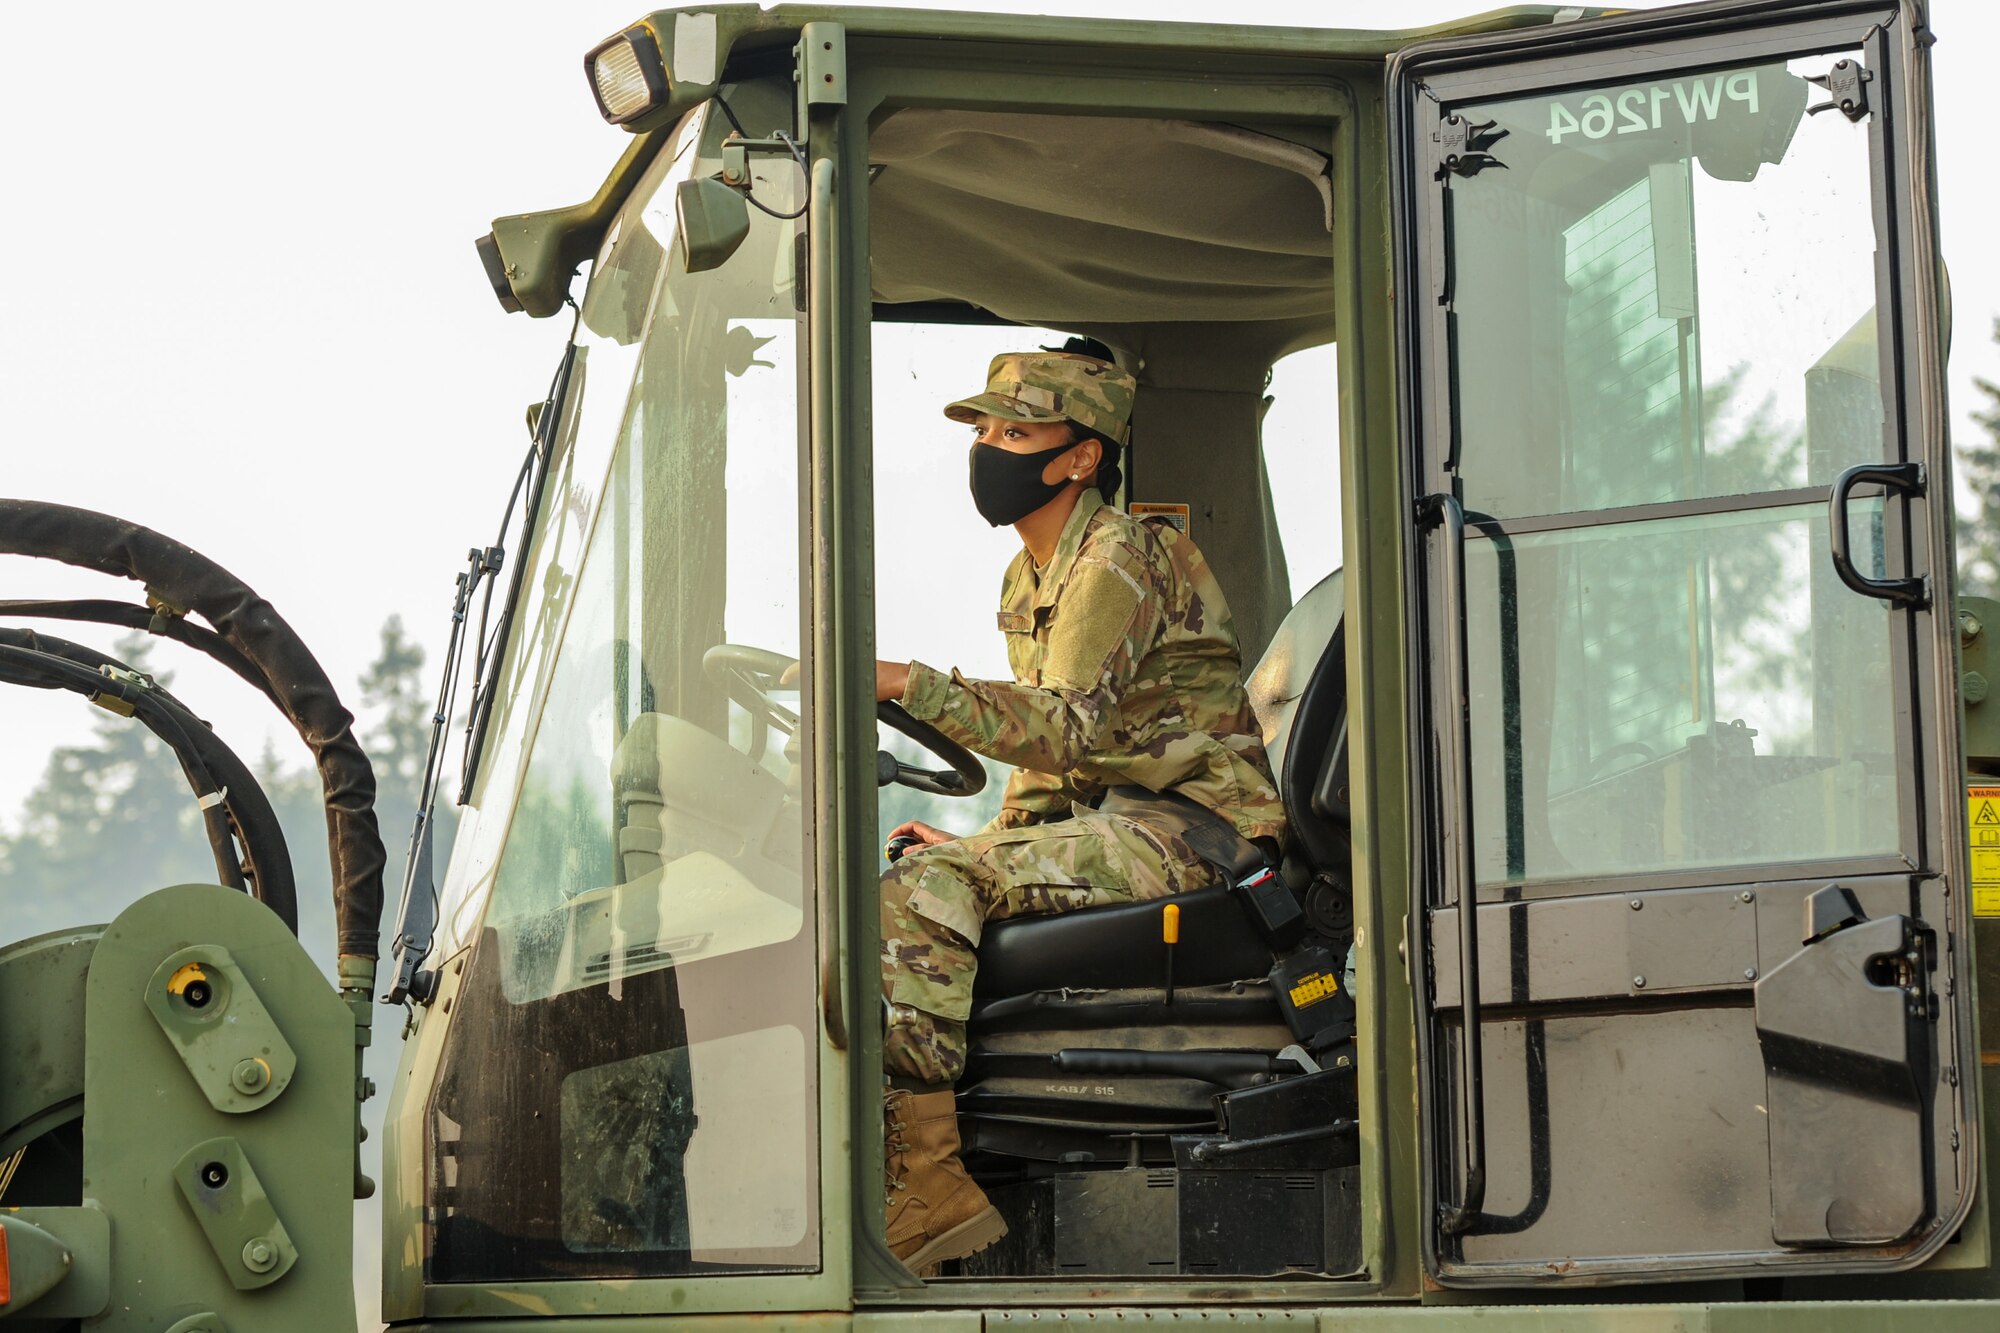 U.S. Air Force Senior Airman Jamie Boyd, a pest management apprentice assigned to the 446th Civil Engineer Squadron (CE), trains on the 10K All-Terrain Forklift on Sept. 11, 2020 at Joint Base Lewis-McChord, Washington.